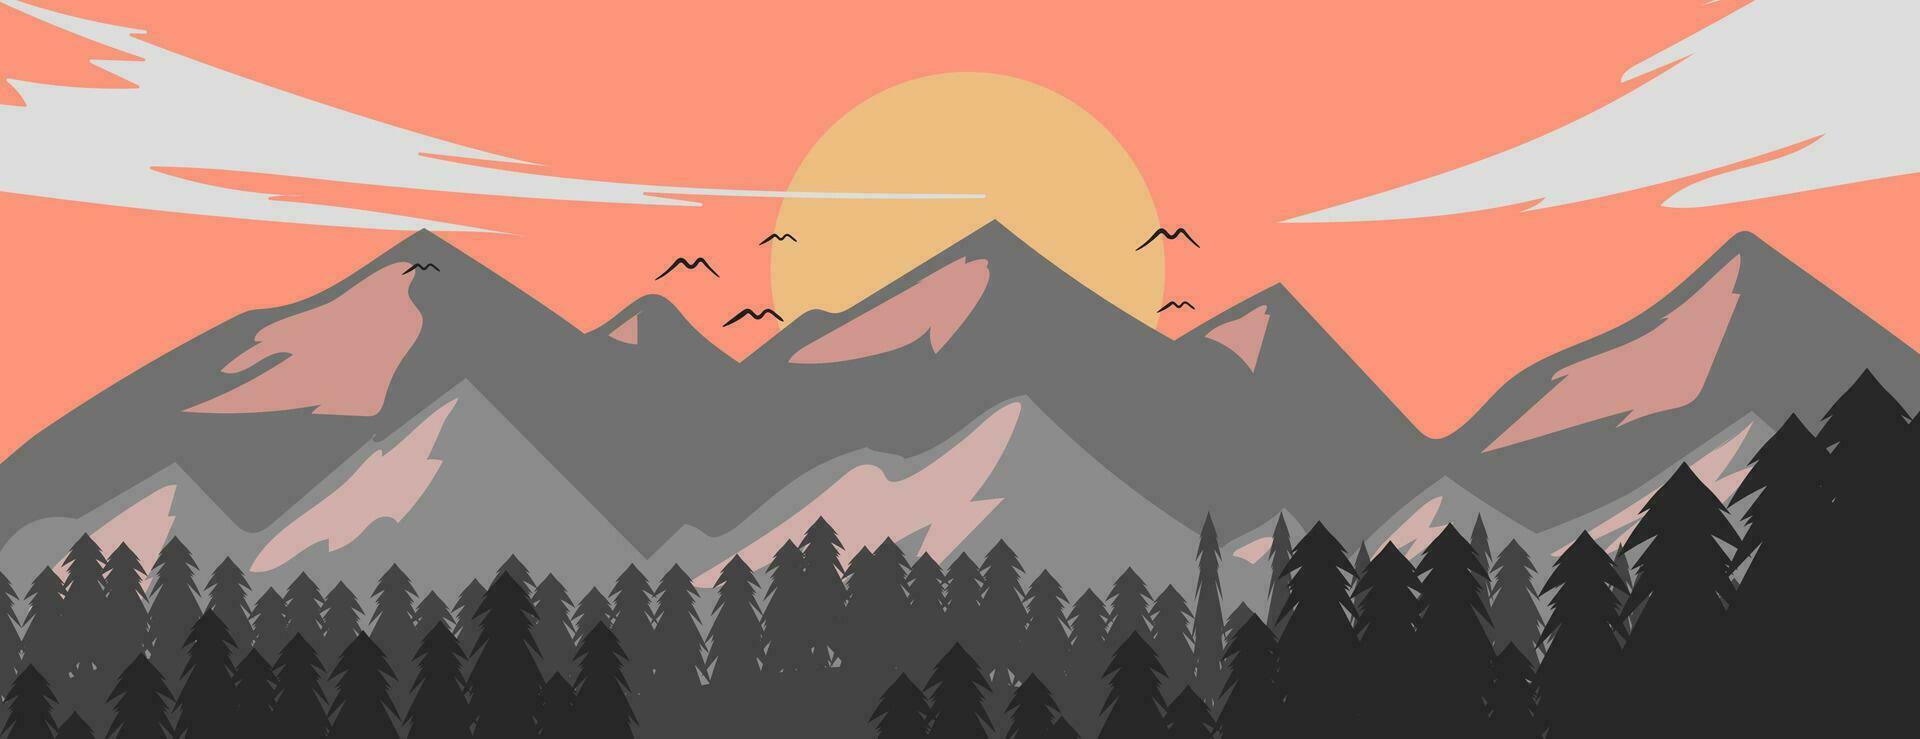 landscape vector illustration of mountain and forest view with slightly cloudy sky in the afternoon